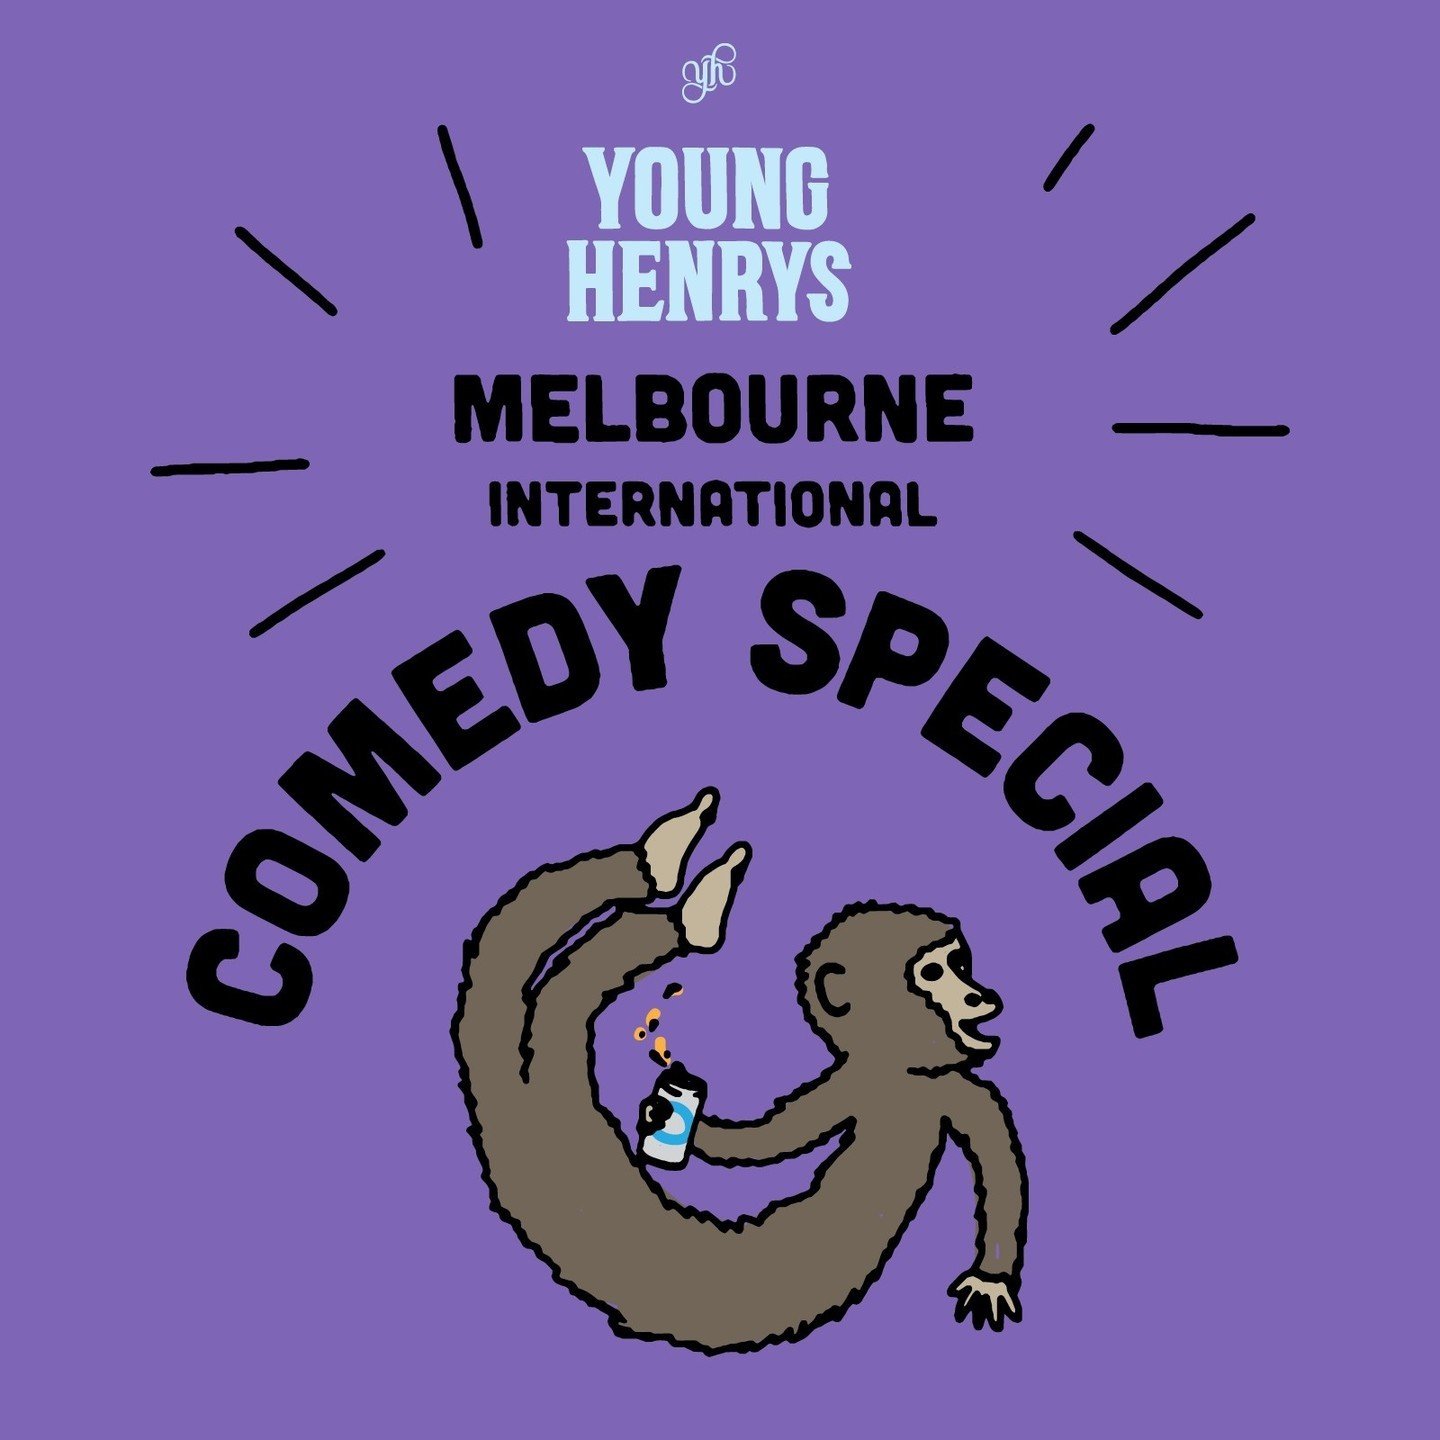 Food, drinks, &amp; laughs: your ultimate @melbcomedyfestival night starts at The Carlton!⁠
⁠
🍺Comedy Drink Special:⁠
$6 Young Henry&rsquo;s Tinnies⁠
⁠
🥟Comedy Food Special:⁠
Select 2 Tapas for $15 (includes chips)⁠ ➡️ swipe to see tapas options⁠
⁠